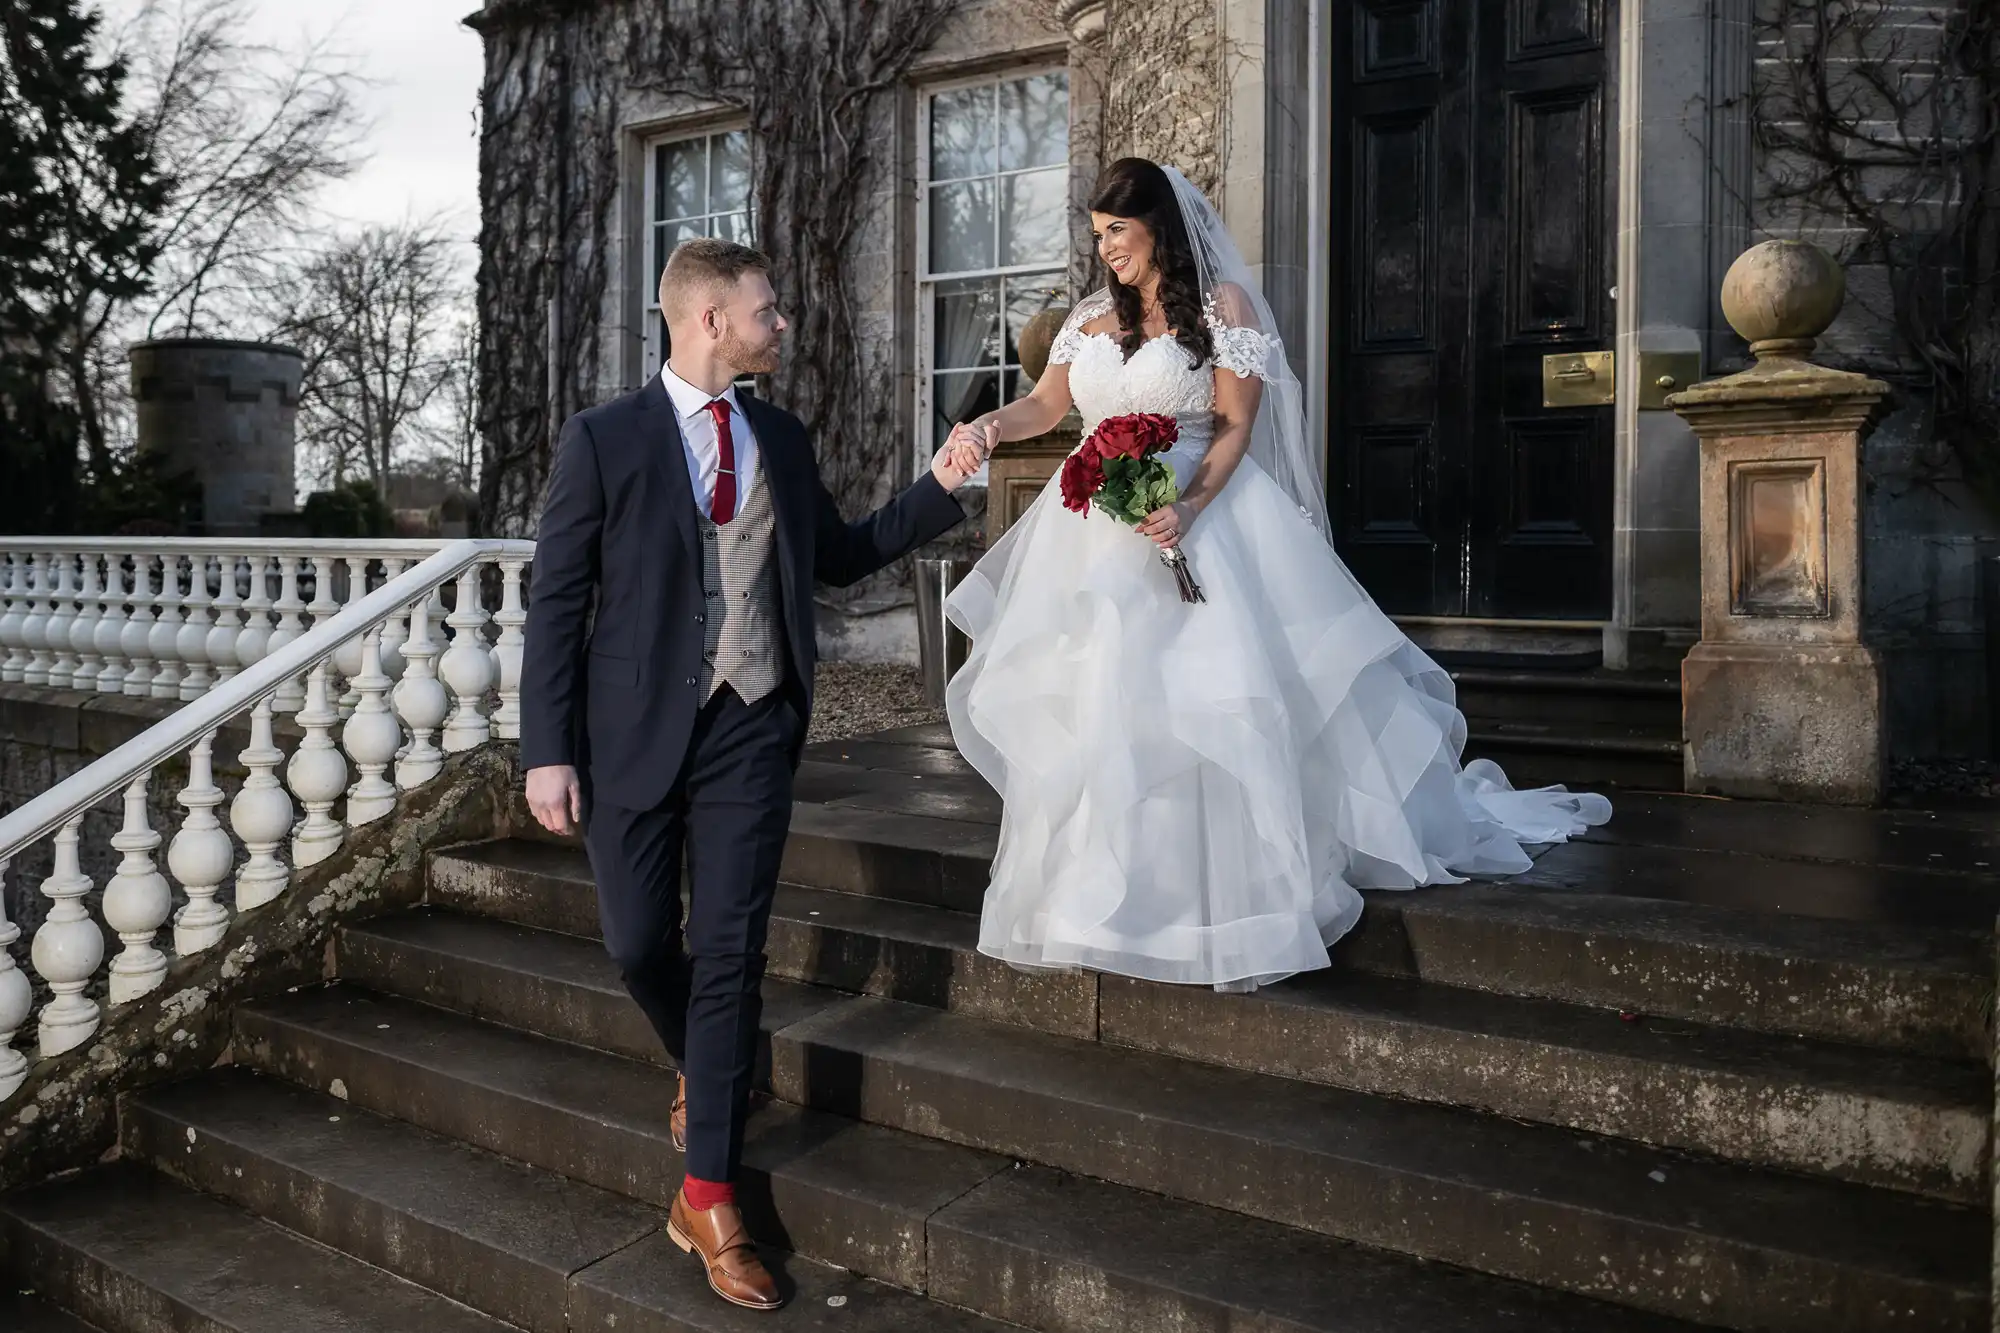 A couple descends the steps of a grand stone building. The man is dressed in a suit, and the woman wears a white wedding dress, holding a bouquet of red flowers.